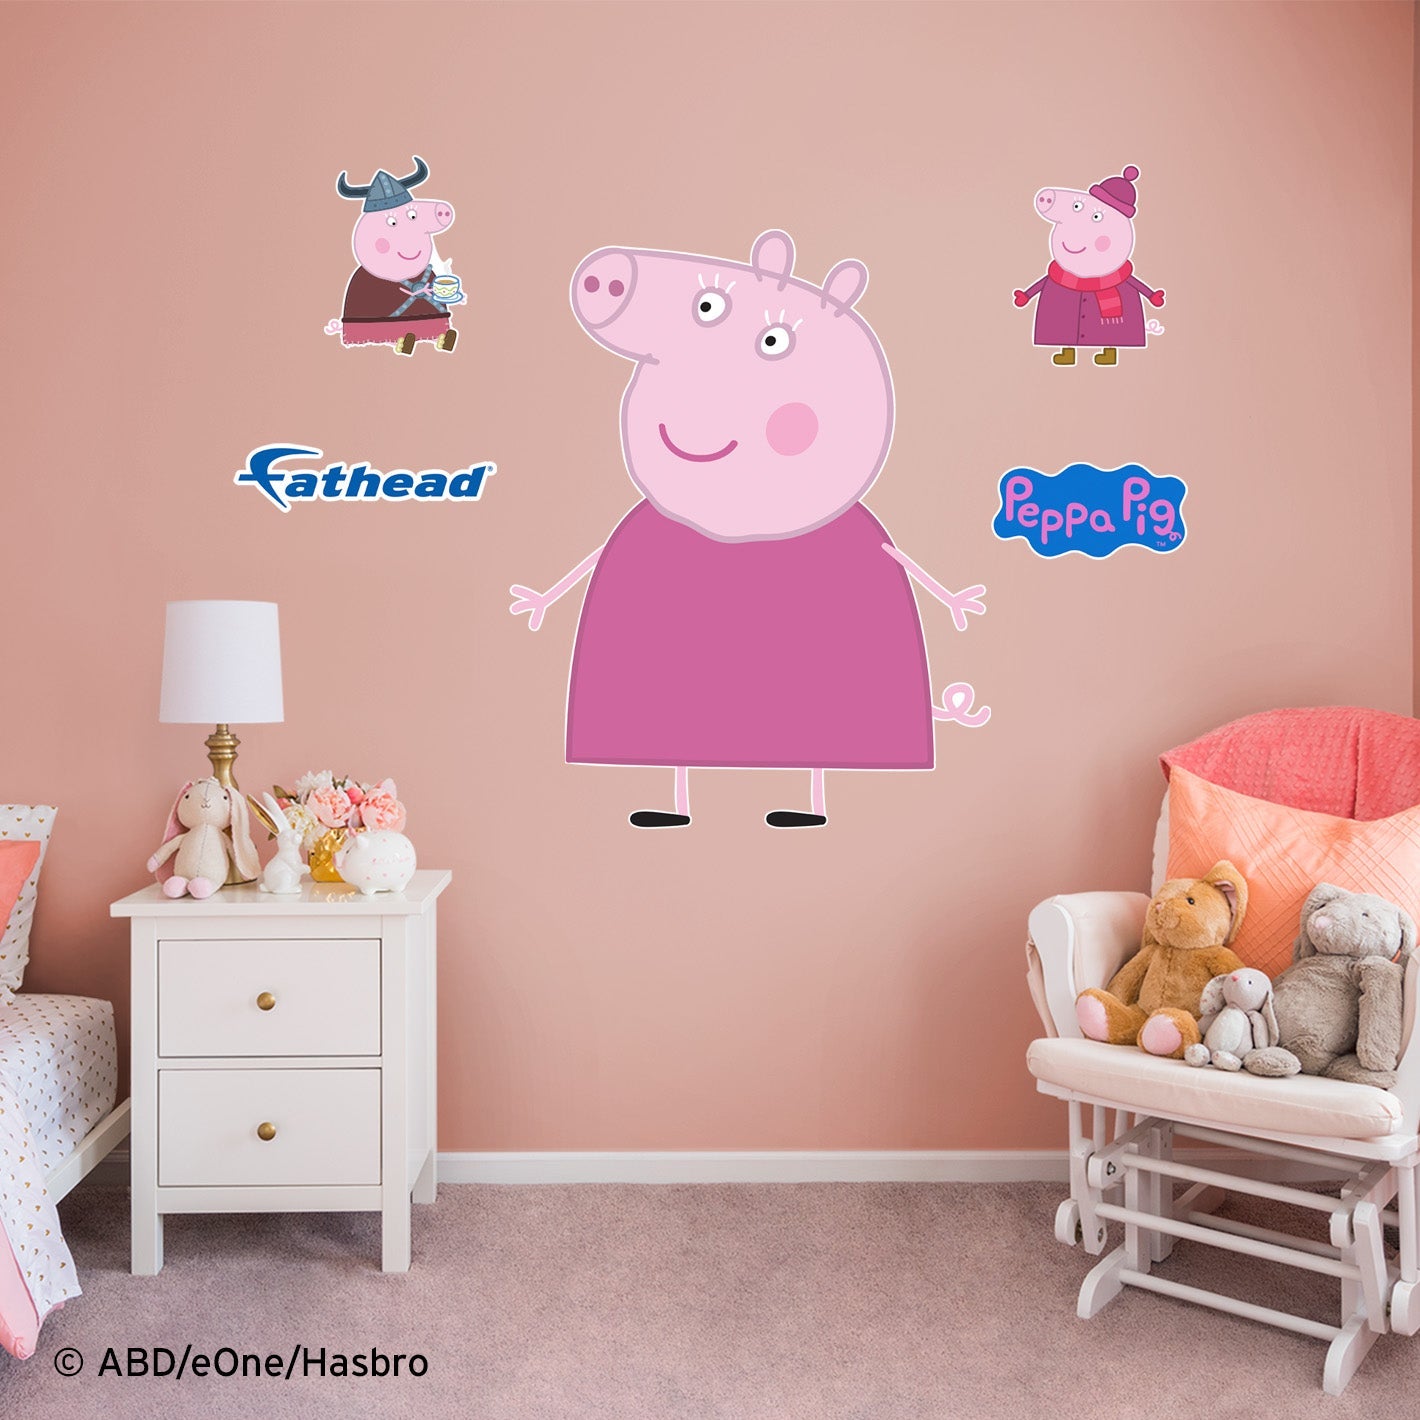 Peppa Pig: Grandma RealBigs - Officially Licensed Hasbro Removable Adhesive Decal